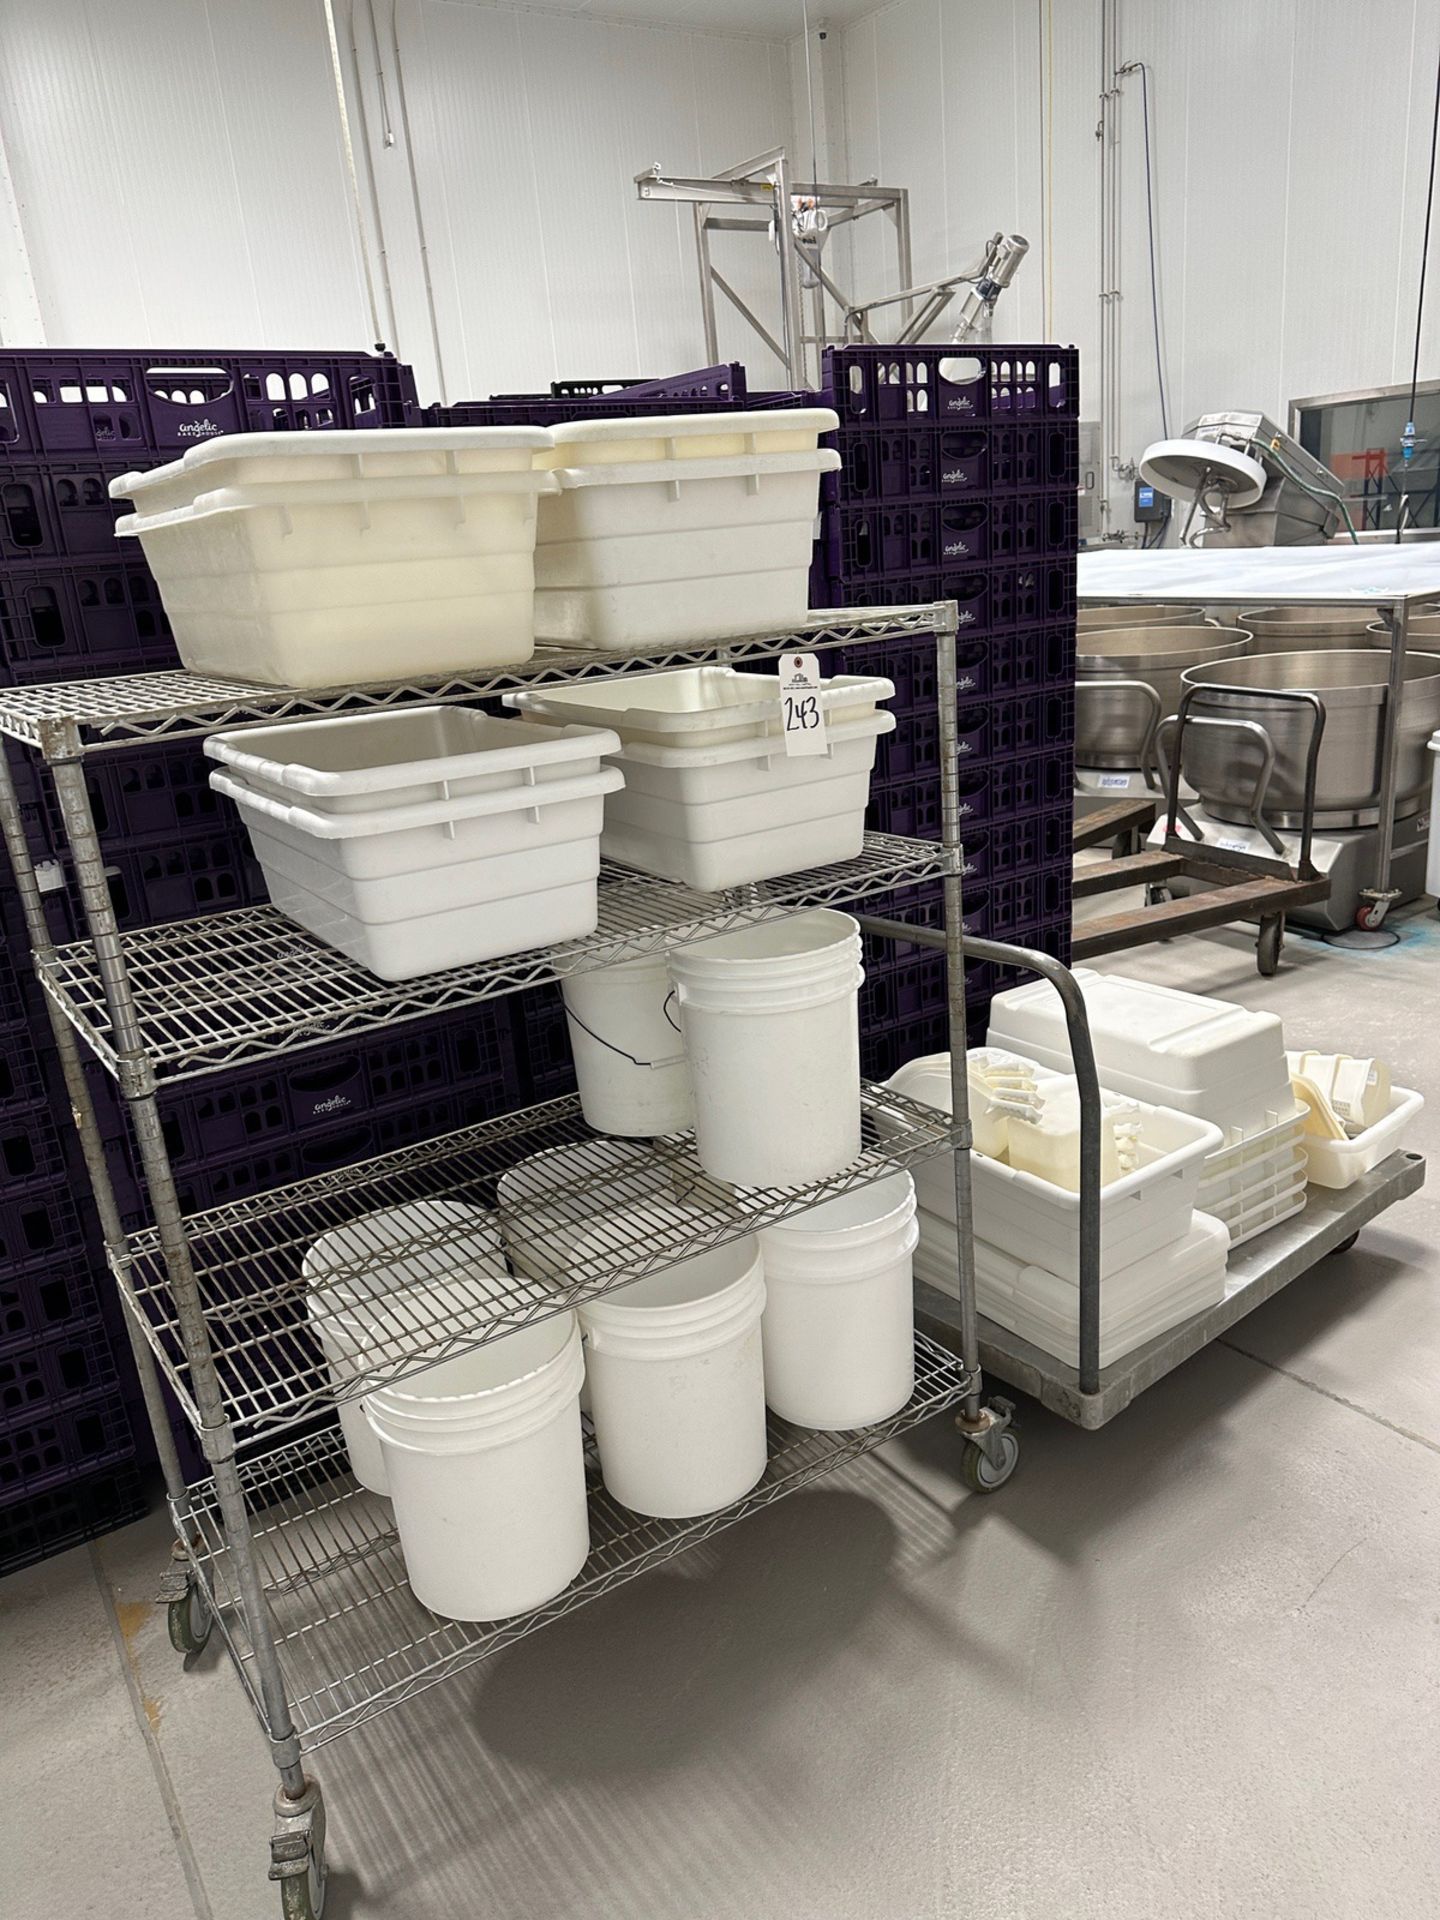 Lot of White Plastic Bins and Buckets with Carts